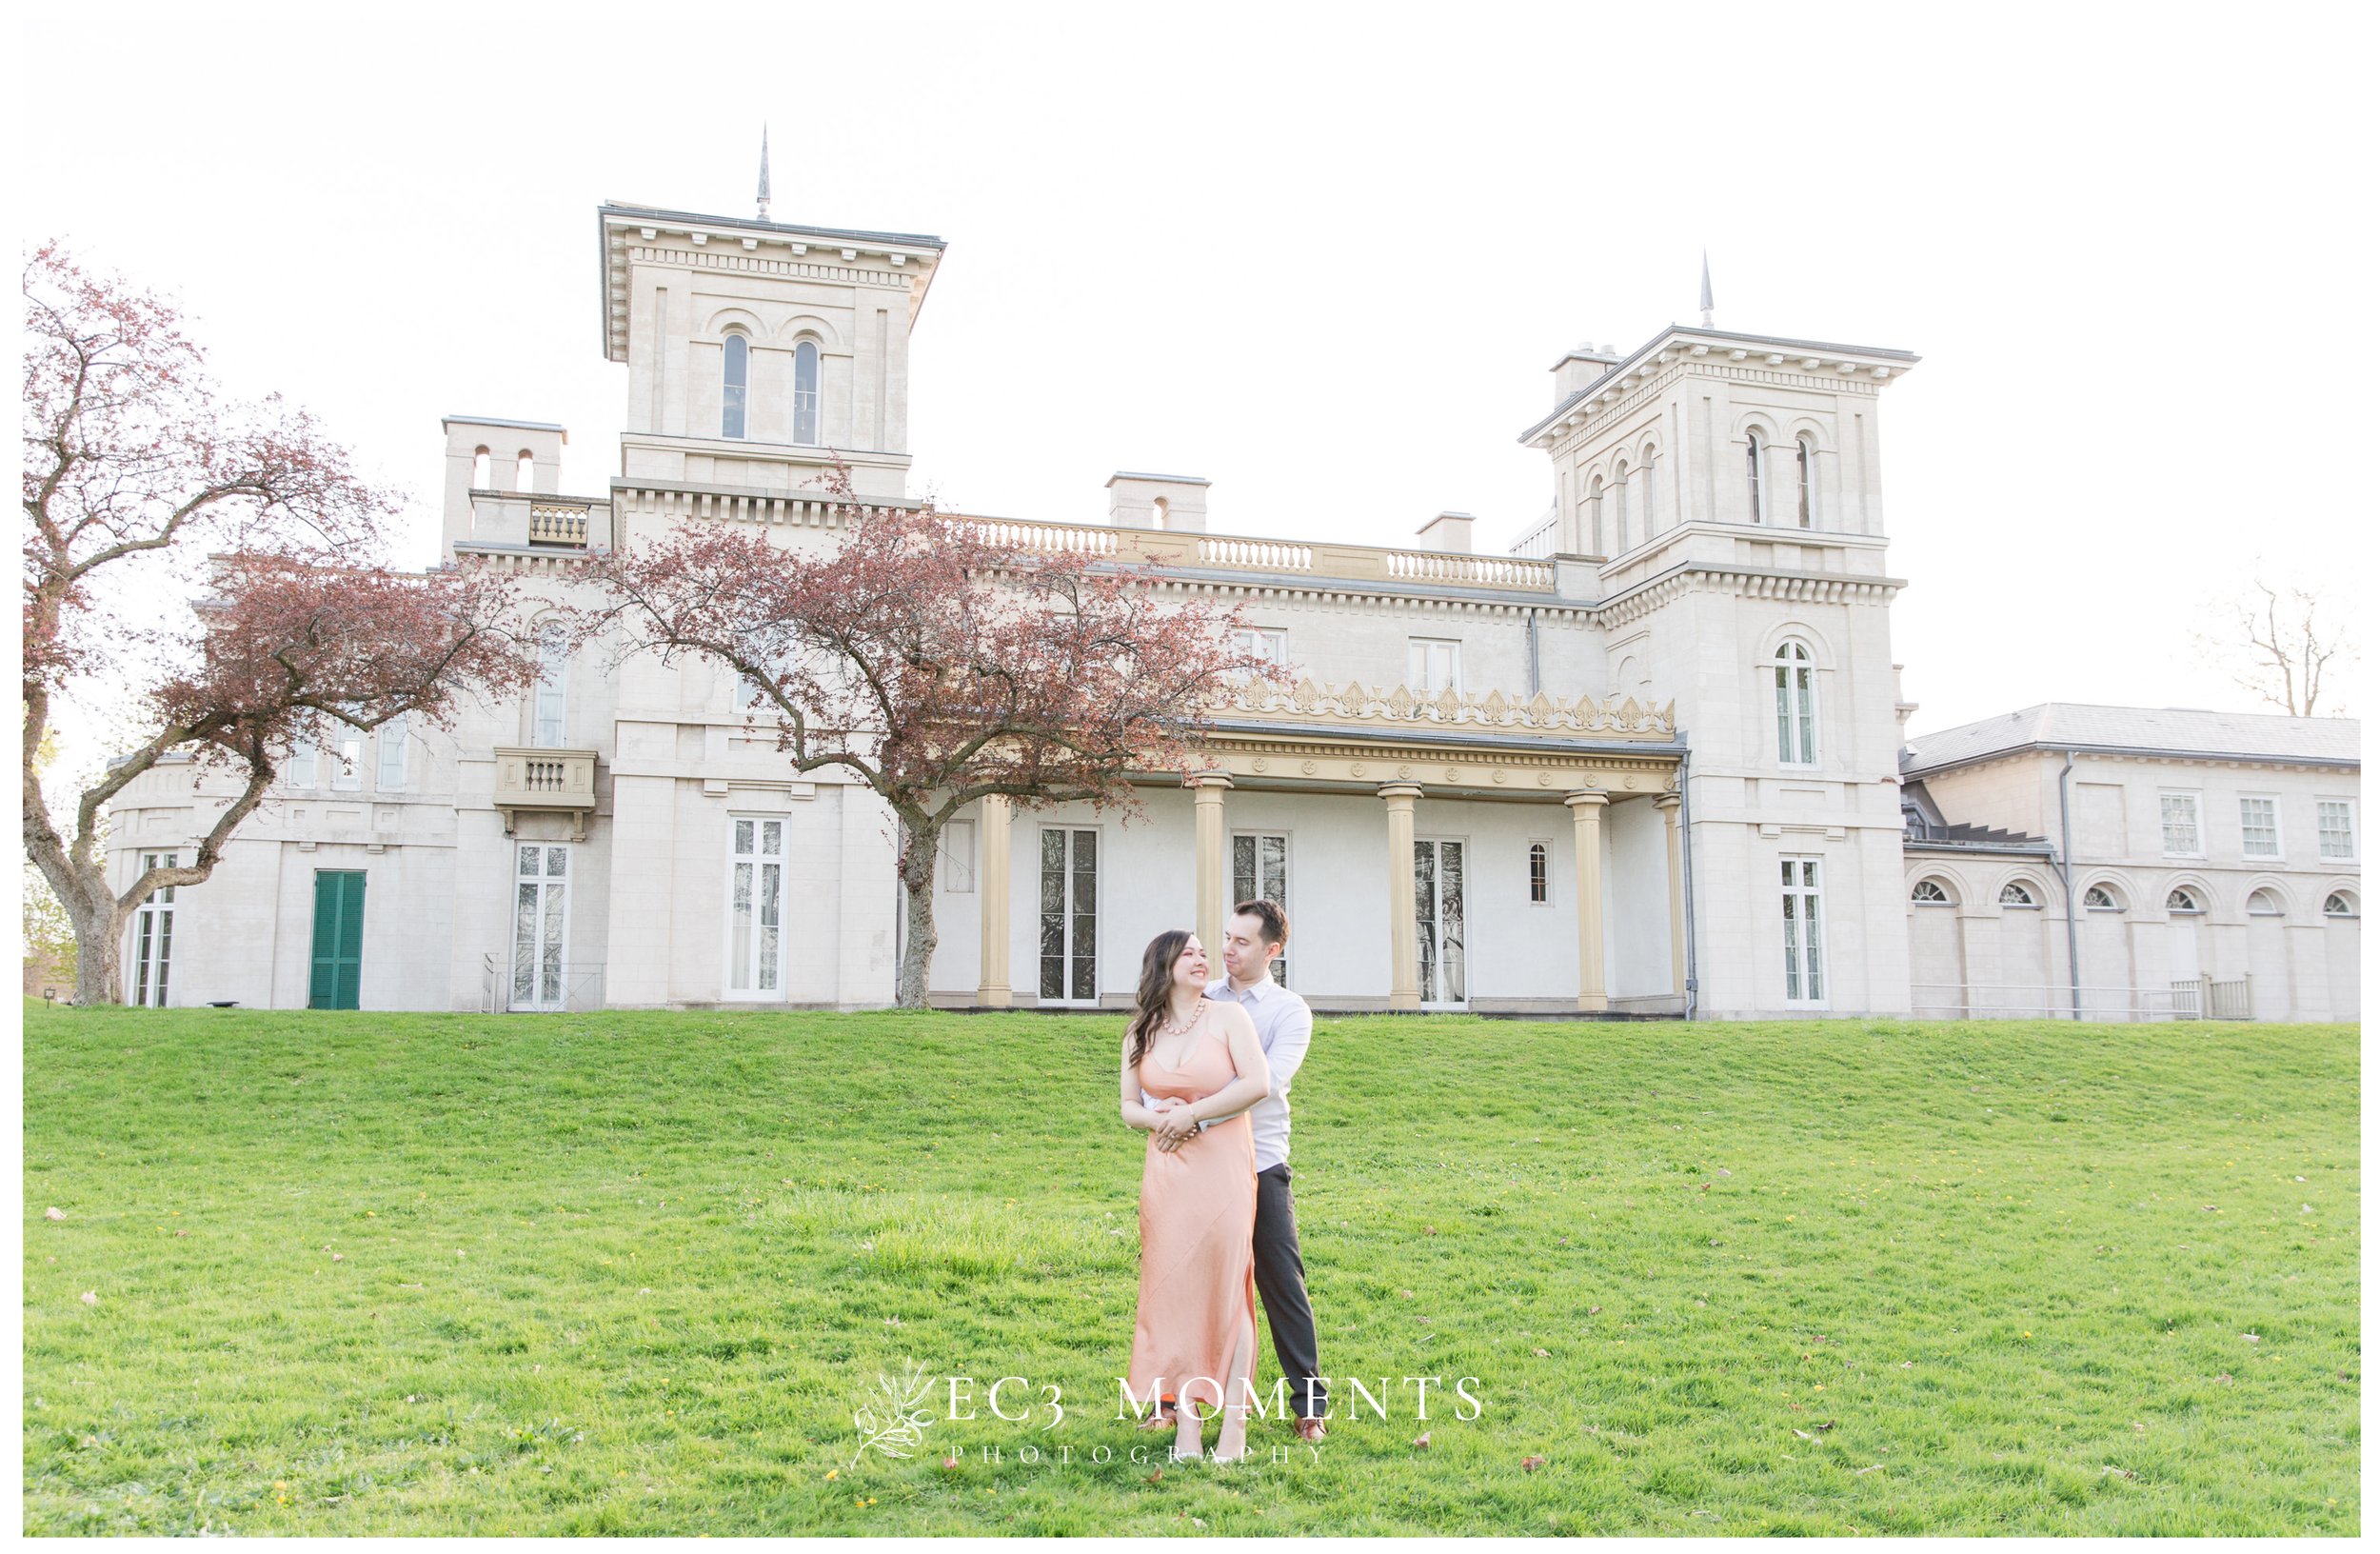  Captured at Dundurn Castle by EC3 Moments 